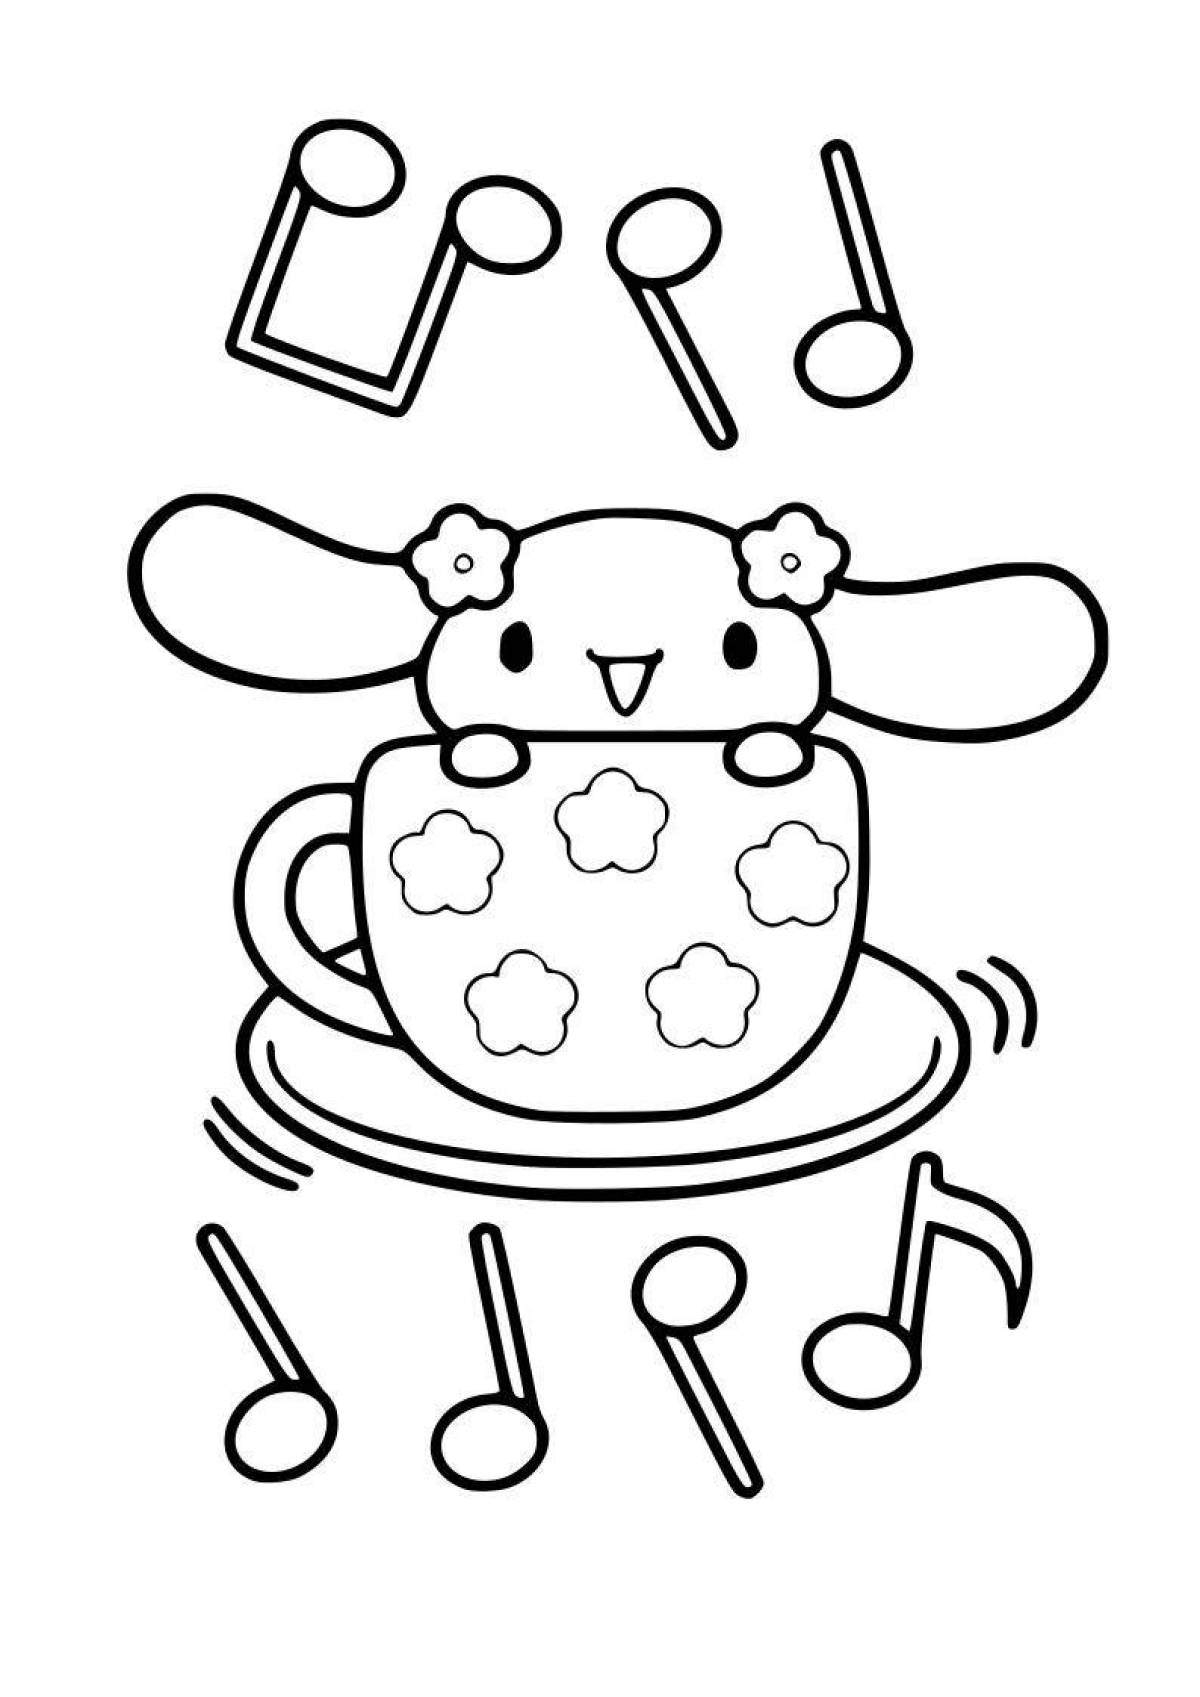 Sparkling hello kitty frog coloring page